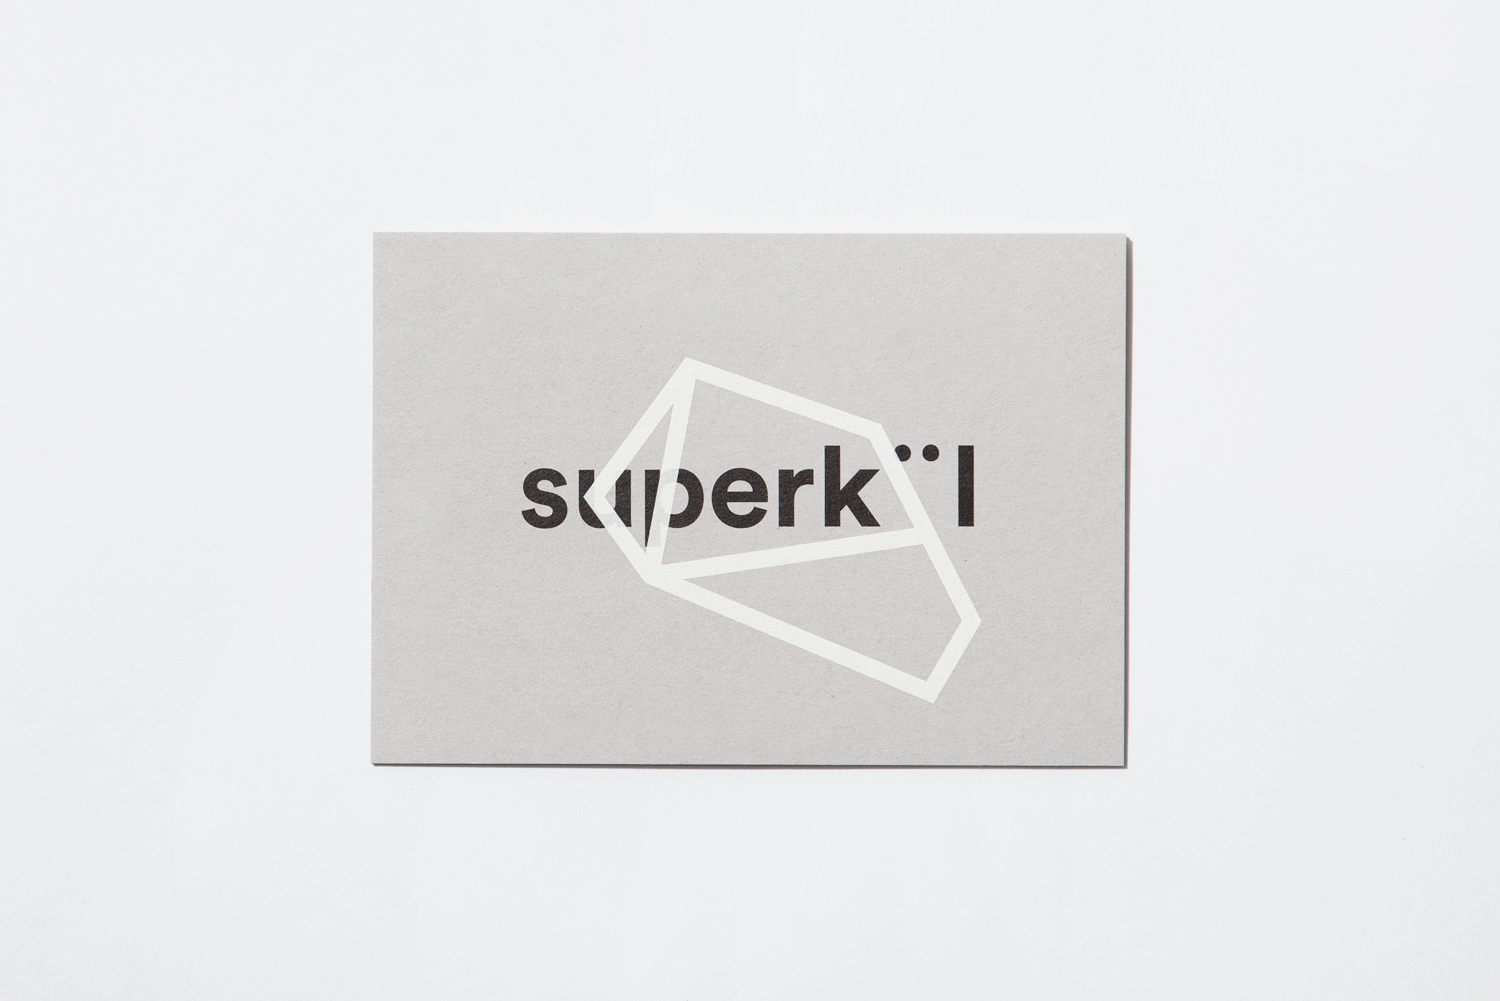 Brand identity and postcards by Toronto-based graphic design studio Blok for Canadian architecture firm Superkül